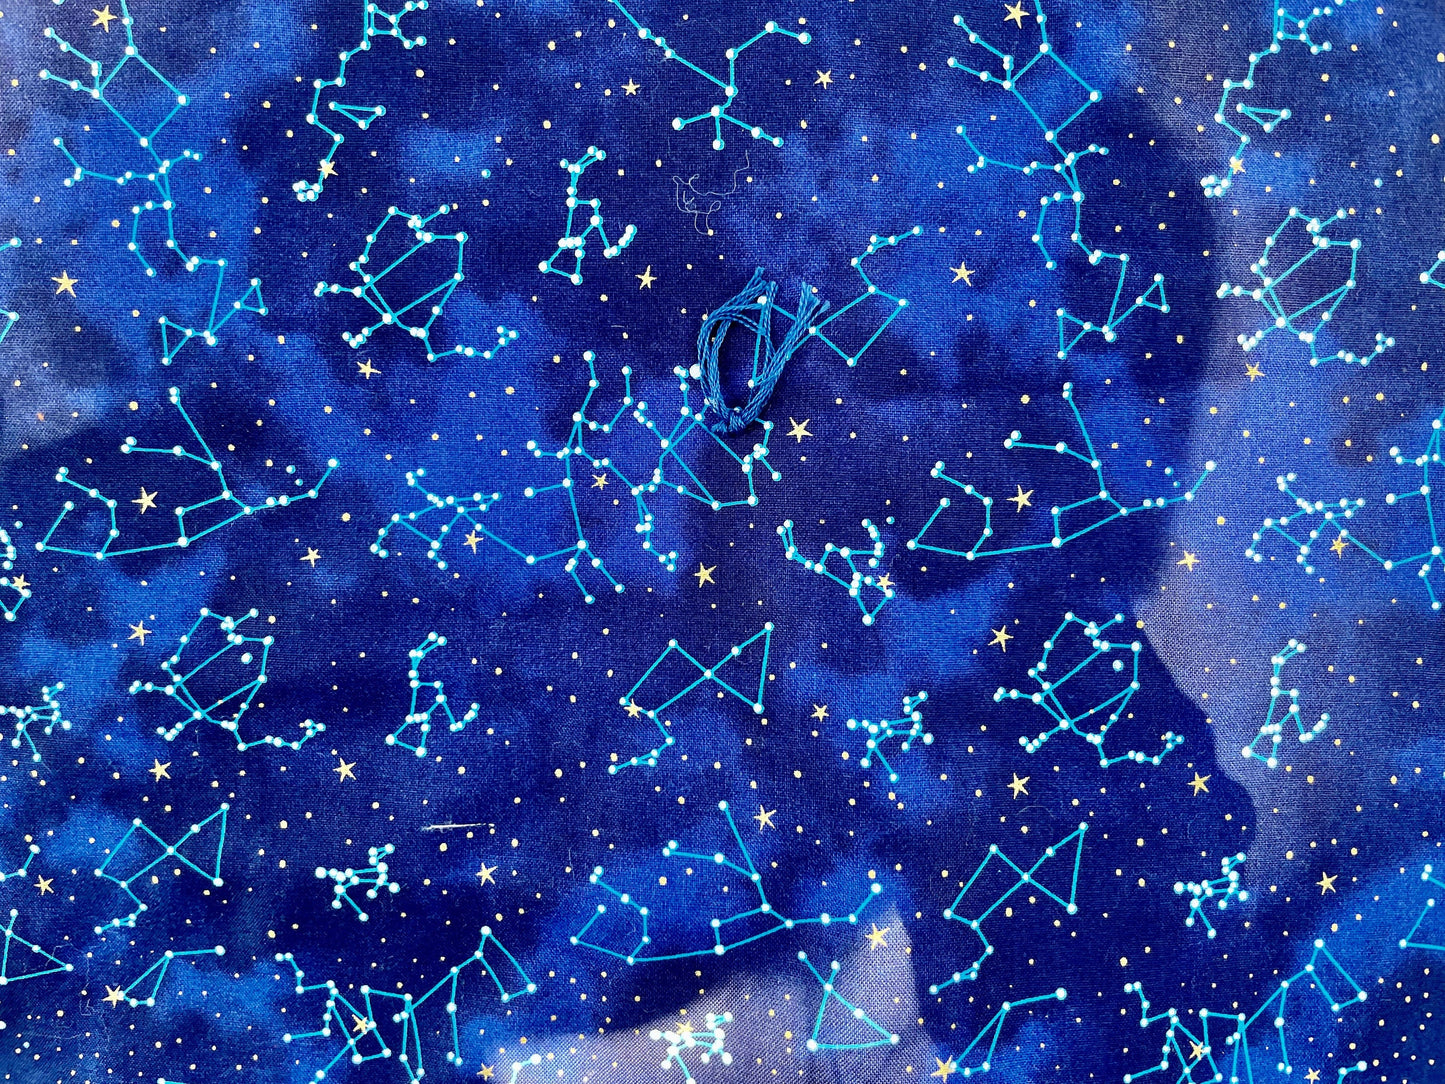 Stunning Constellation and Stars Throw/Lap quilt